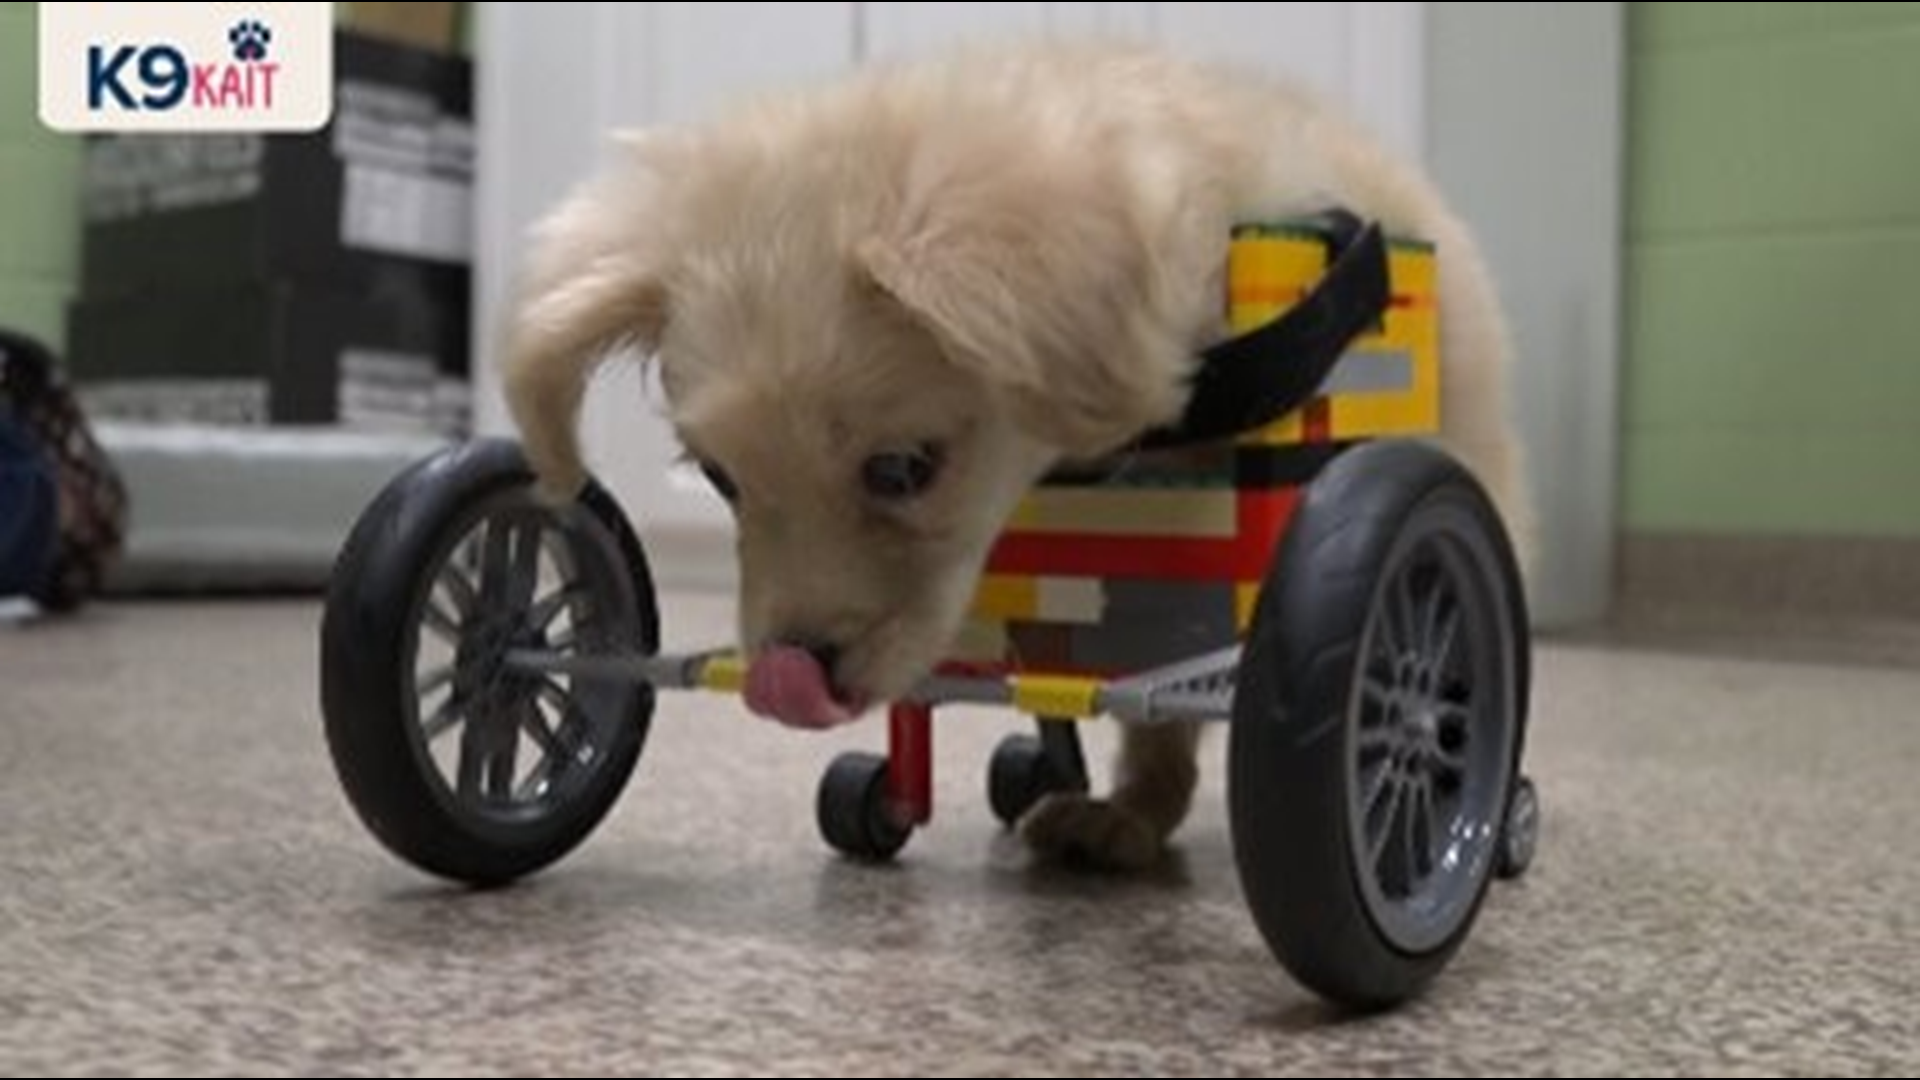 K9Kait tells the story of Gracie, a special dog who has an equally special wheelchair made out of LEGOs.